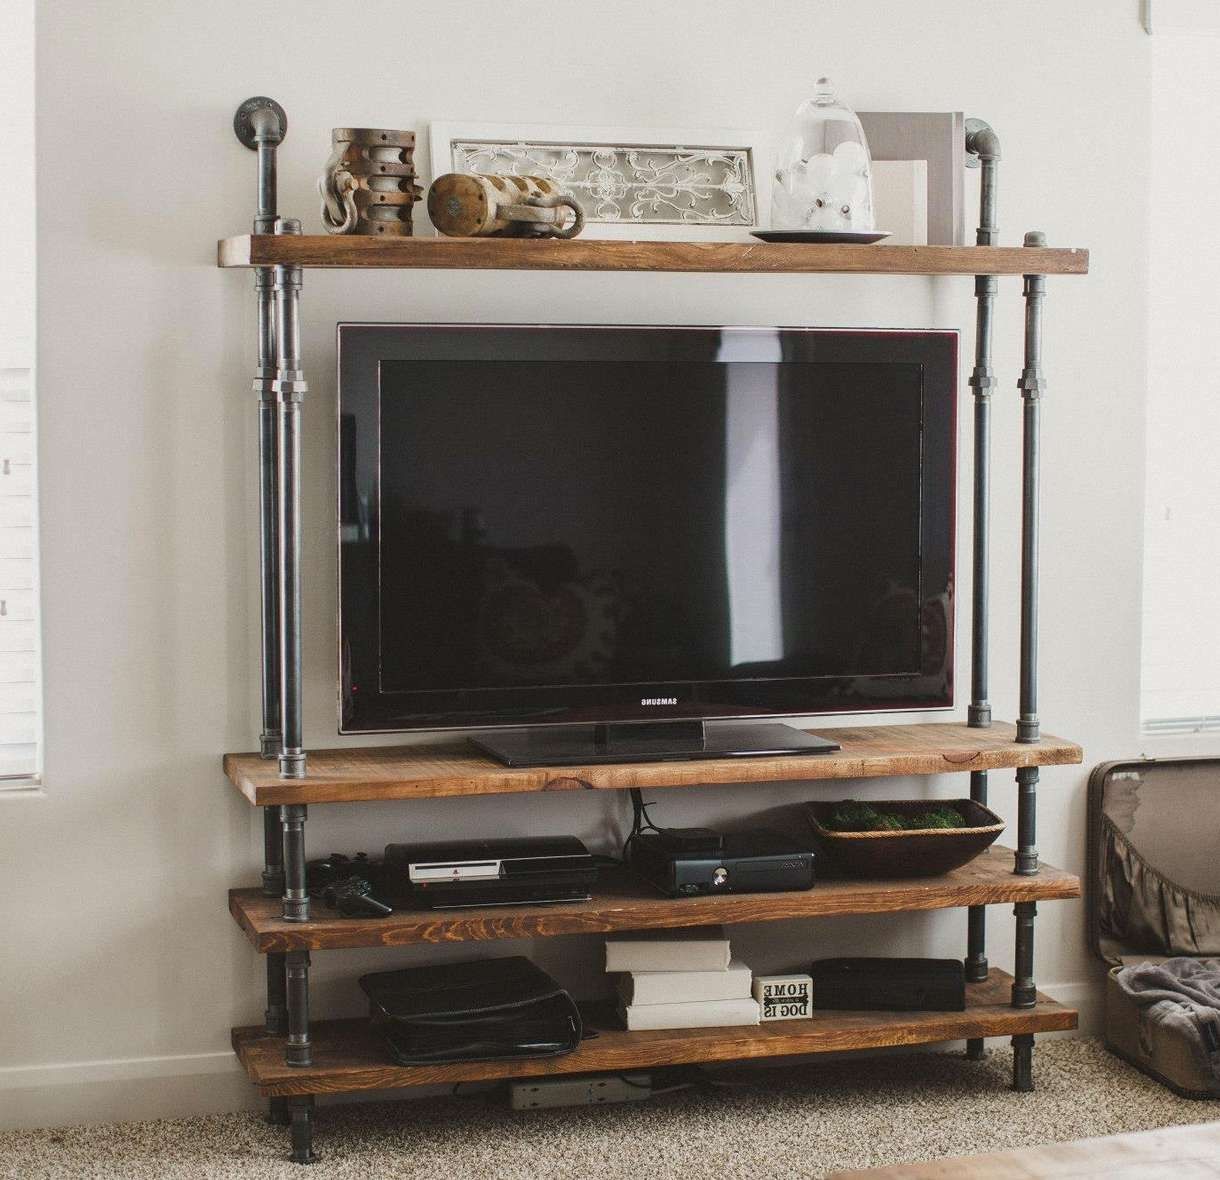 Tv : Beautiful Long Tv Stands Furniture Dramatic Long Tv Cabinet Regarding Long Tv Cabinets Furniture (Gallery 14 of 20)